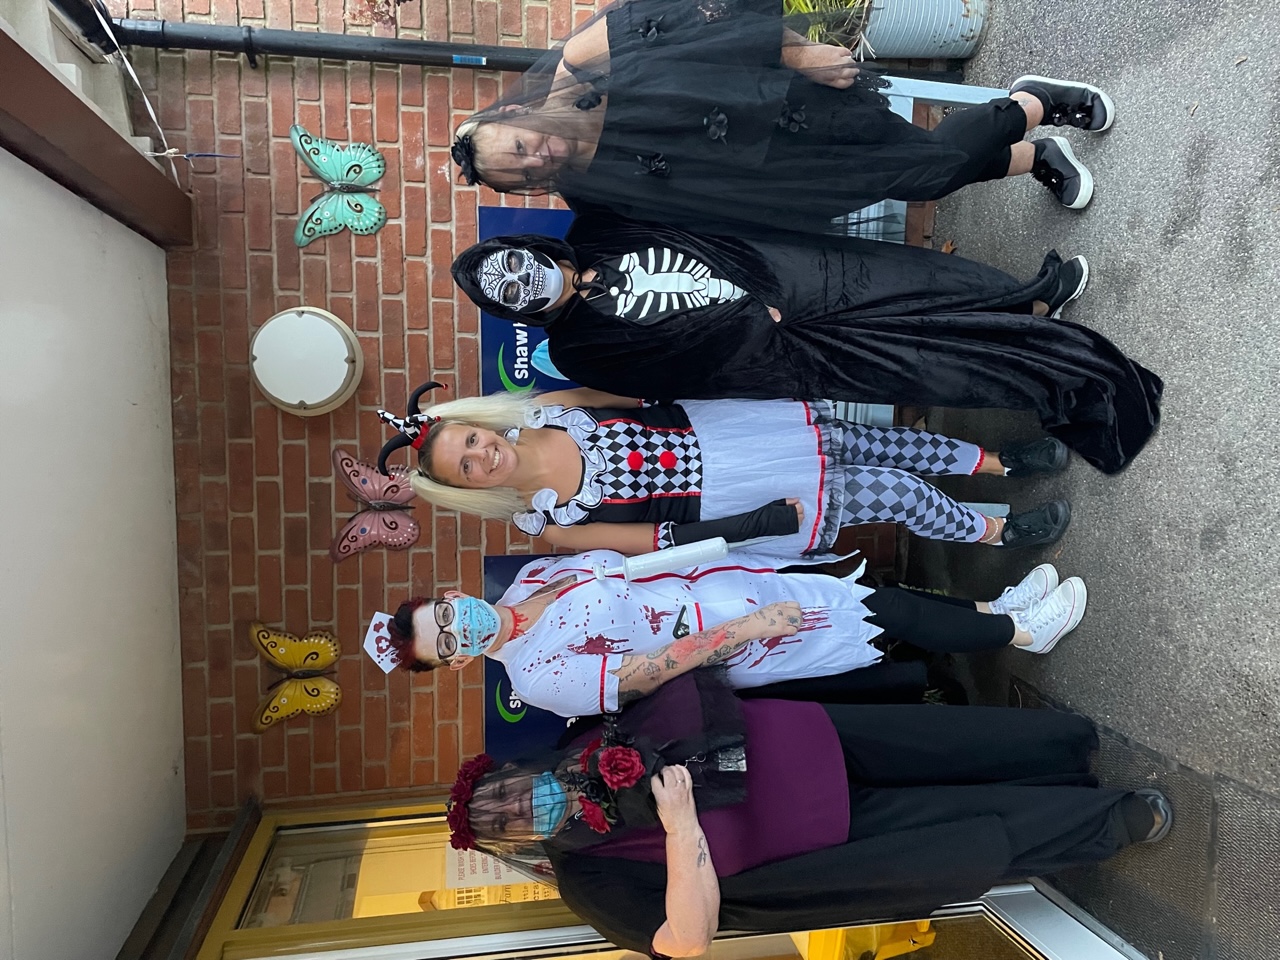 Employees at Warmere dressed up for Halloween 